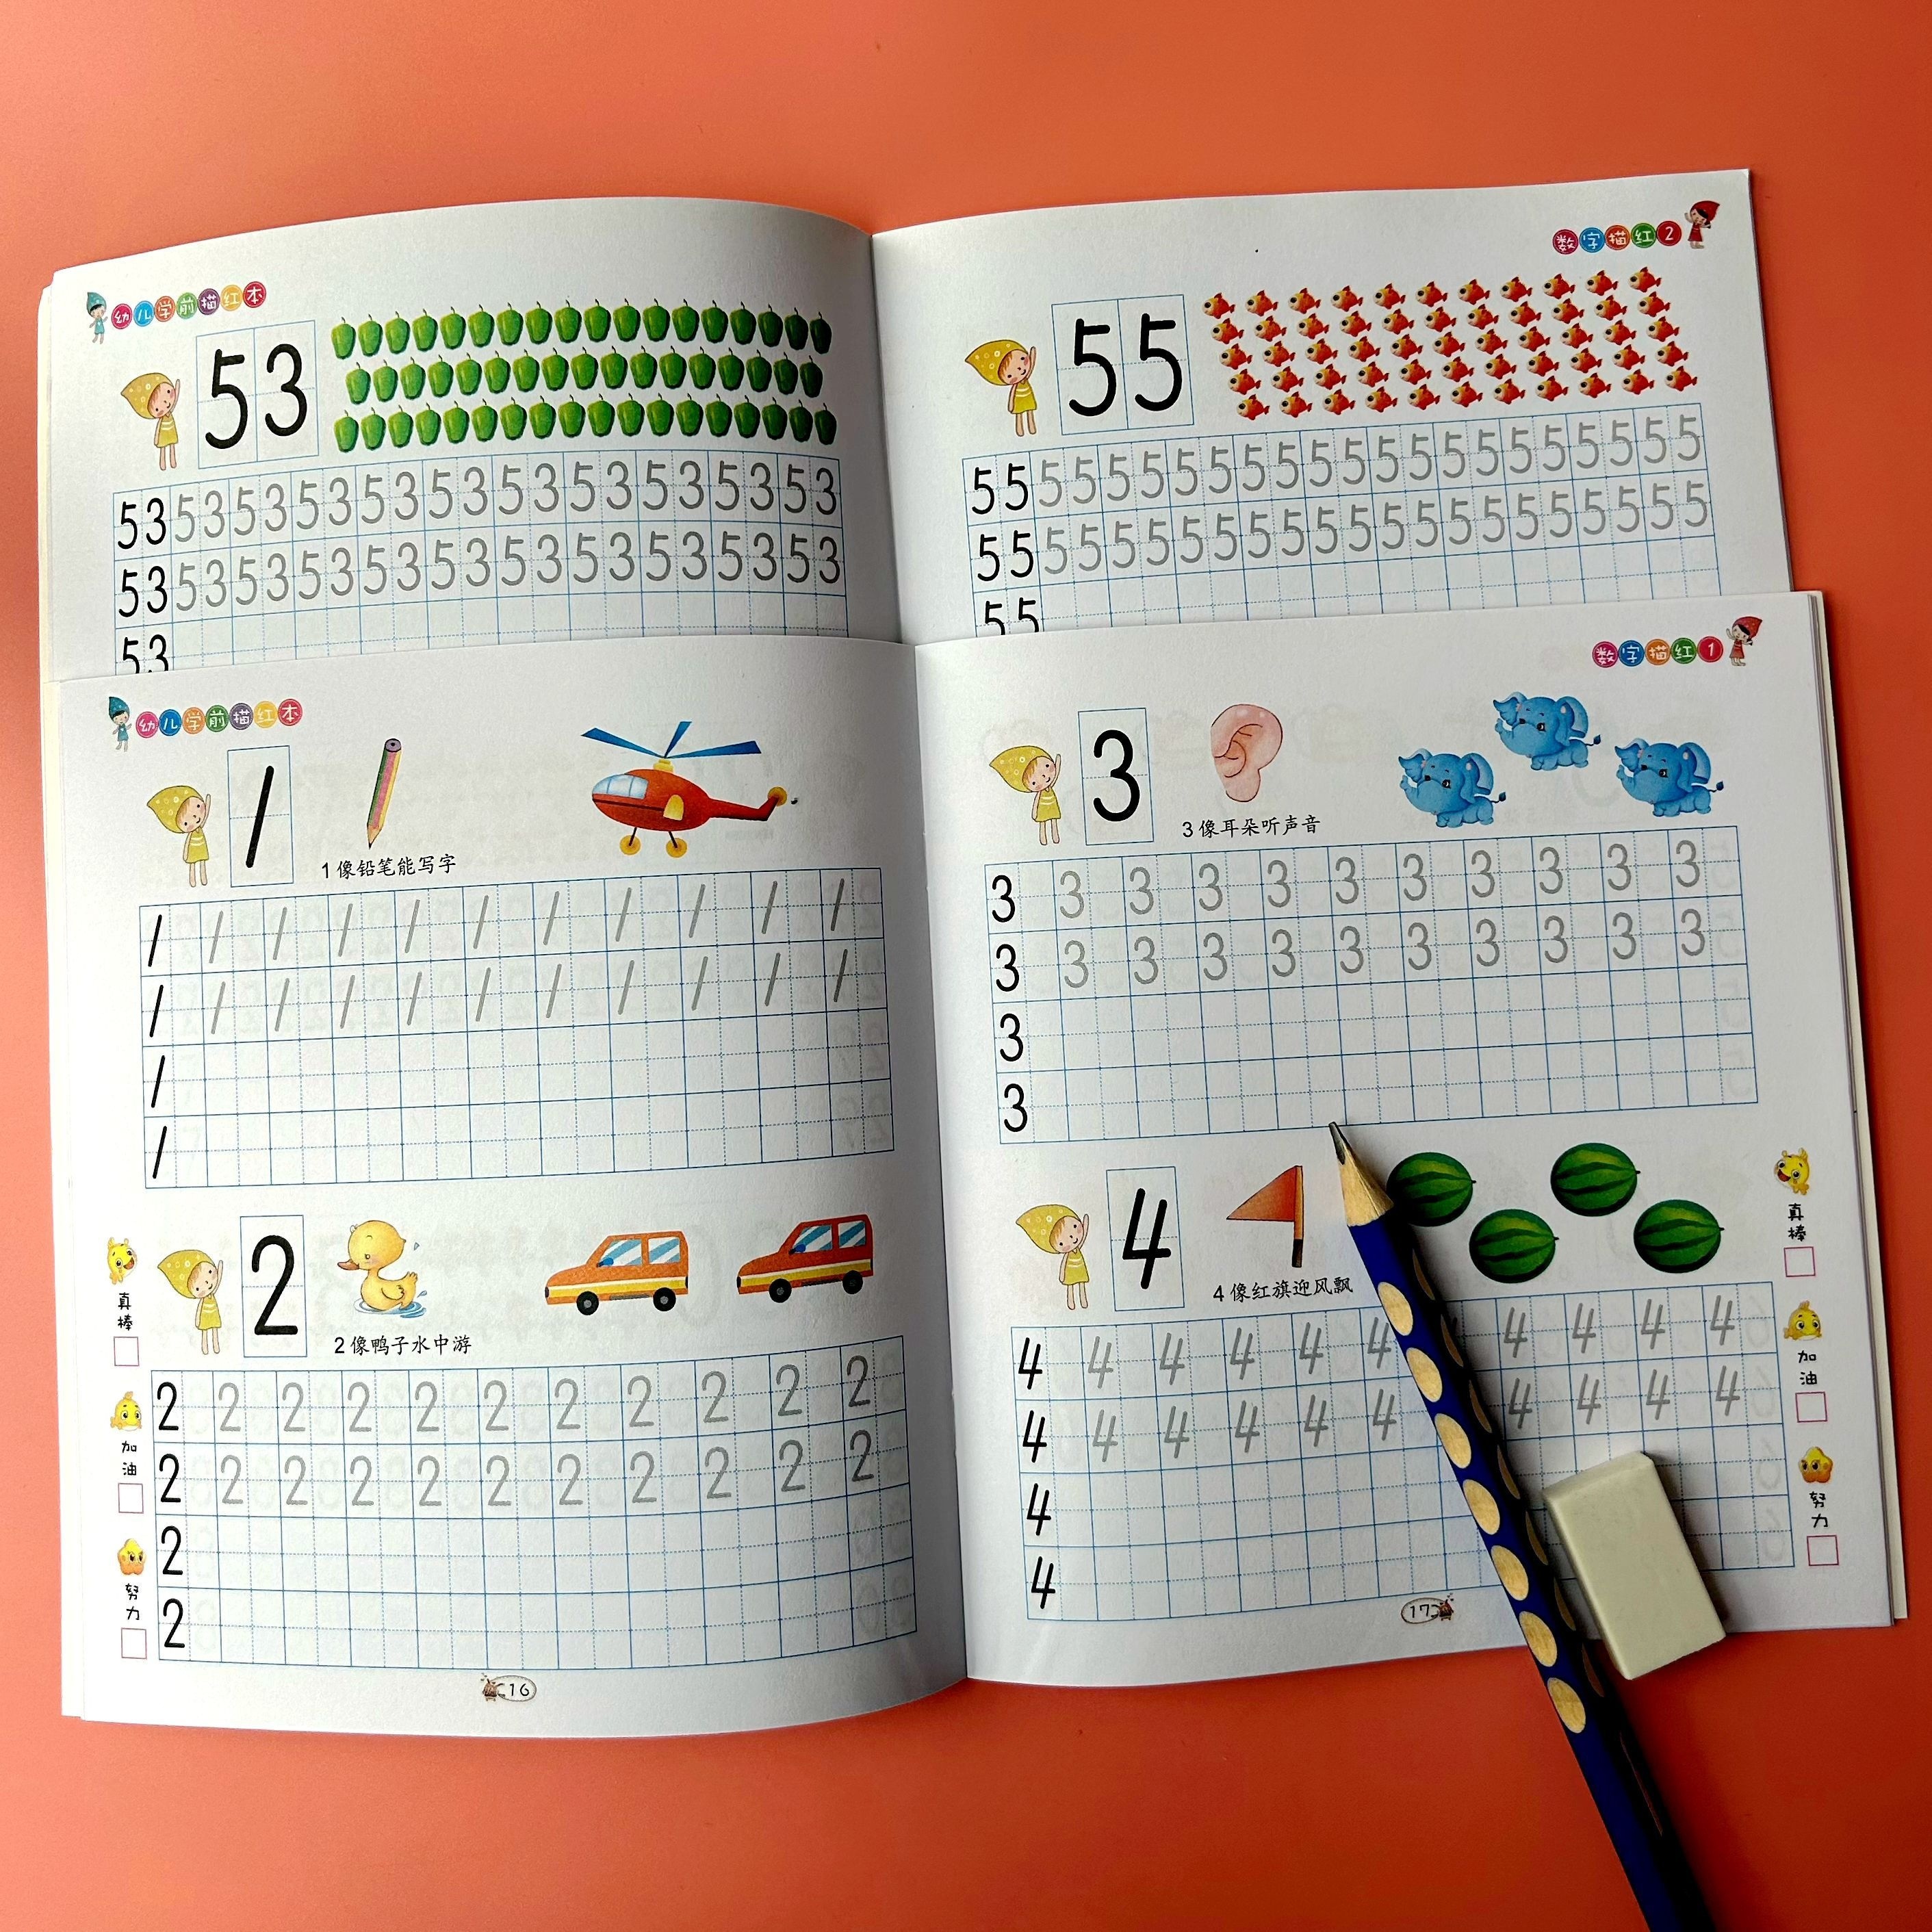 

Number Tracing Workbook From 1 To 100, 1 Set Of 2 Books, Suitable For Beginners To Practice Number Writing(contains Chinese Characters, Does Not Affect Use)